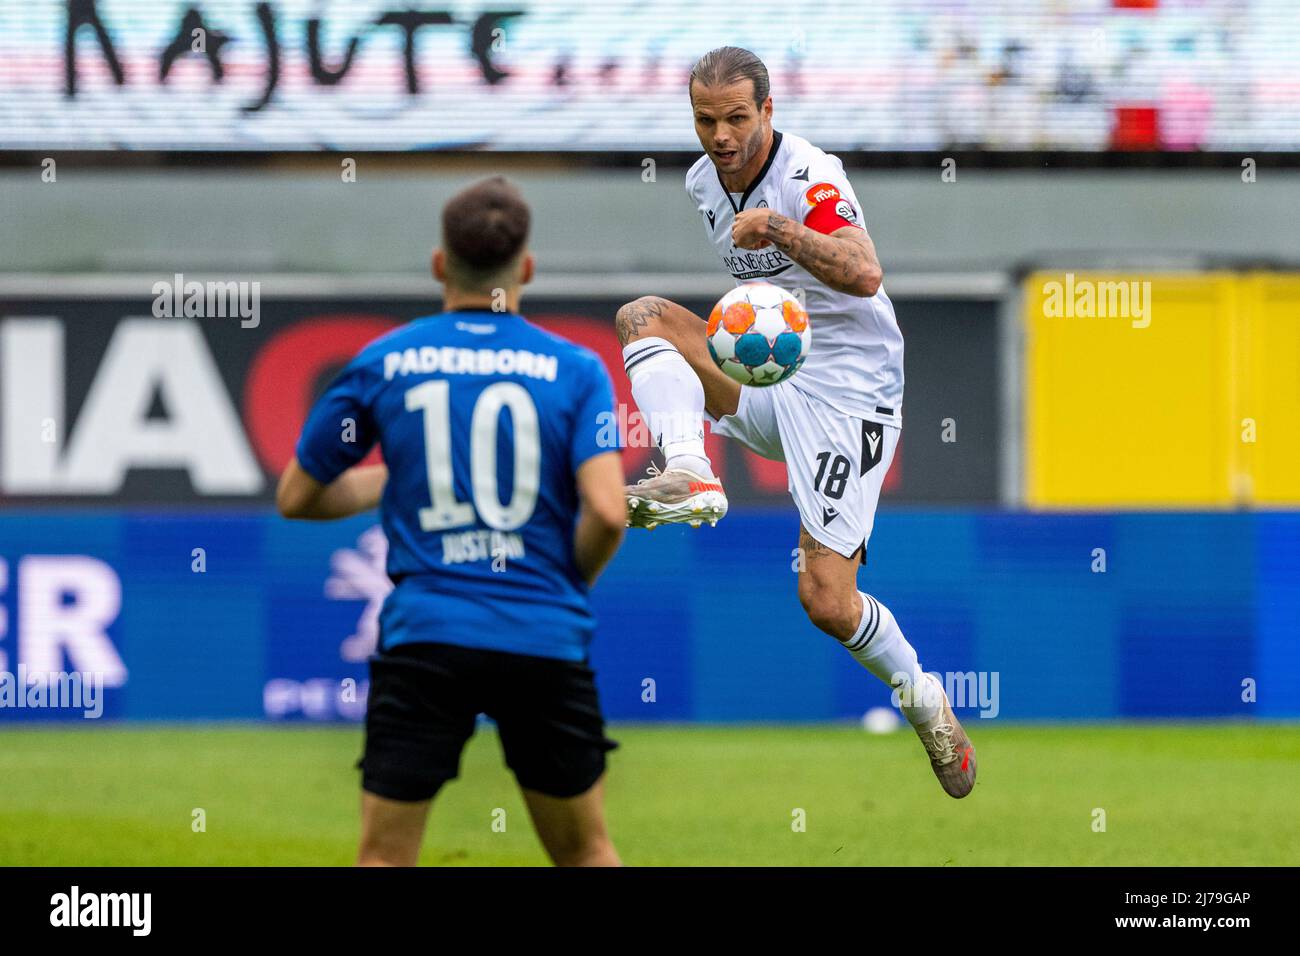 06 May 2022, North Rhine-Westphalia, Paderborn: Soccer: 2. Bundesliga, SC Paderborn 07 - SV Sandhausen, Matchday 33, Benteler-Arena: Sandhausen's Dennis Diekmeier stops the ball. Photo: David Inderlied/dpa - IMPORTANT NOTE: In accordance with the requirements of the DFL Deutsche Fußball Liga and the DFB Deutscher Fußball-Bund, it is prohibited to use or have used photographs taken in the stadium and/or of the match in the form of sequence pictures and/or video-like photo series. Stock Photo